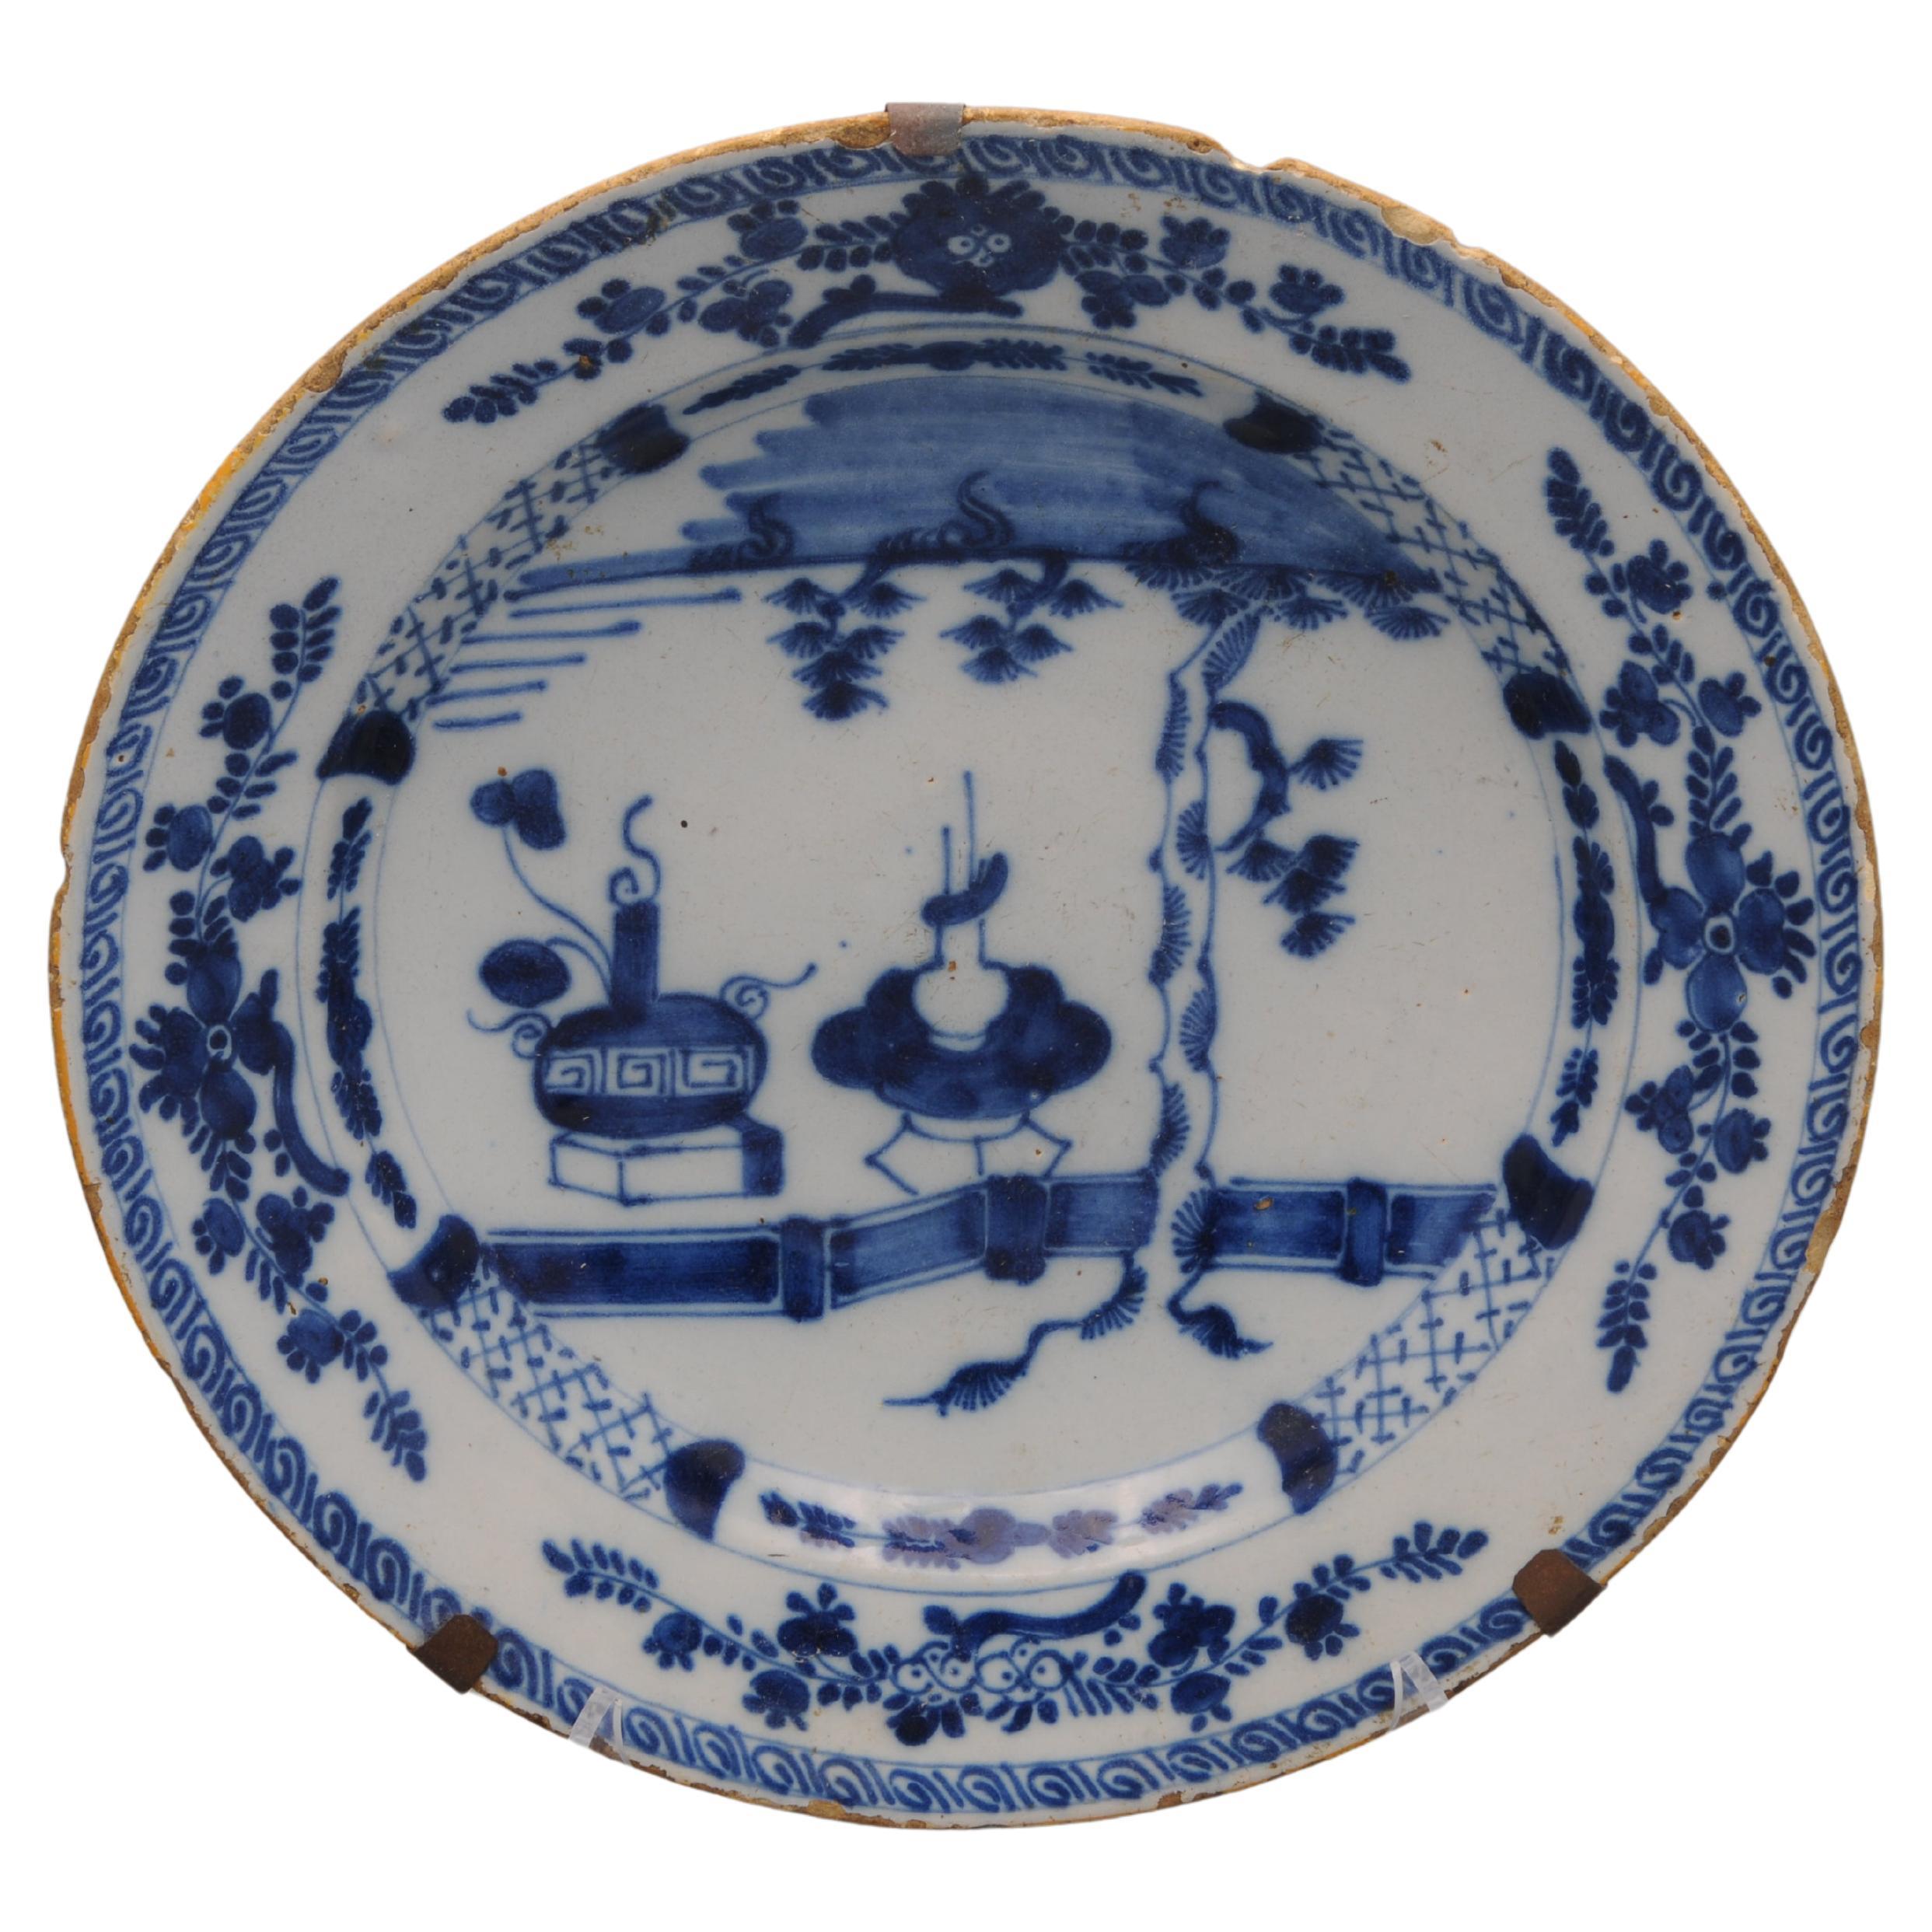 Delft - Chinoiserie style Charger by De Claauw, mid 18th century